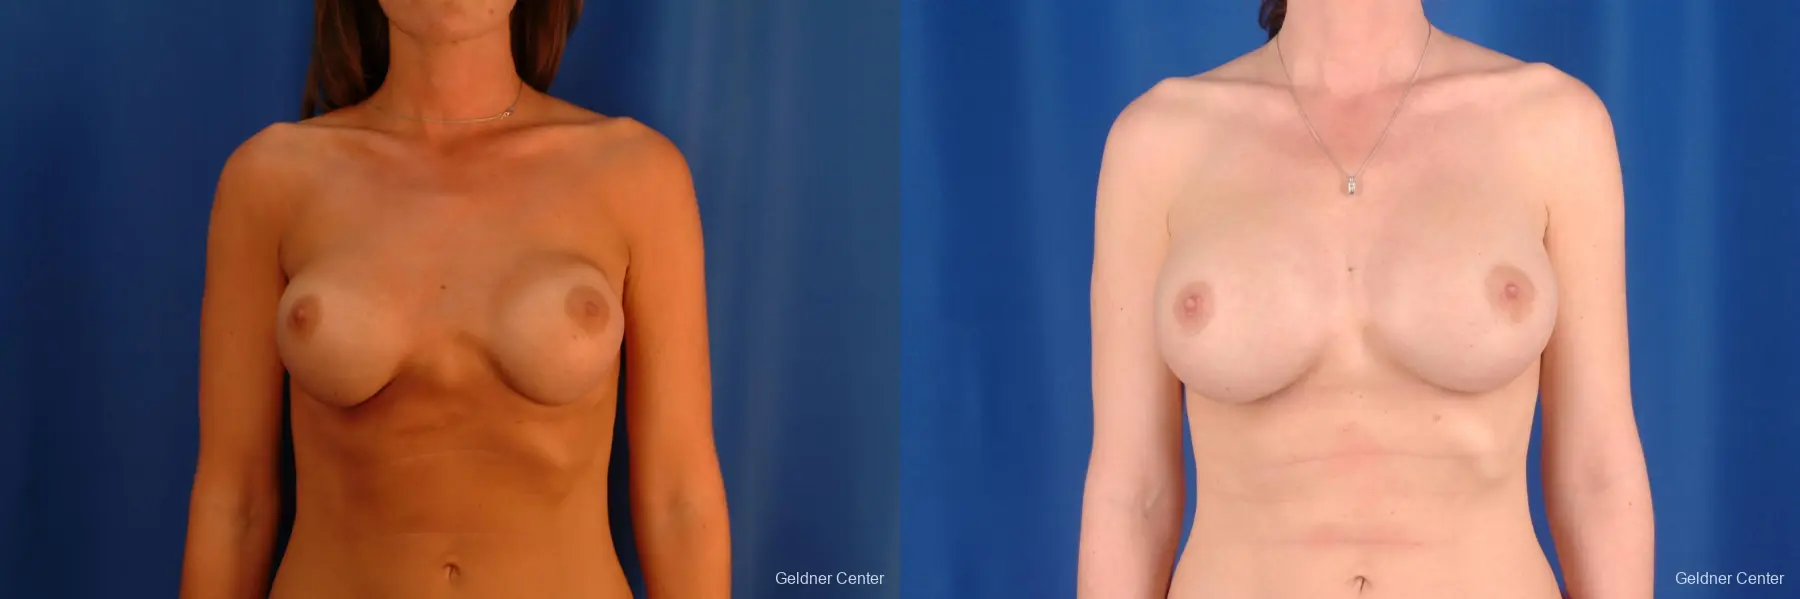 Breast Augmentation Lake Shore Dr, Chicago 2619 - Before and After 1